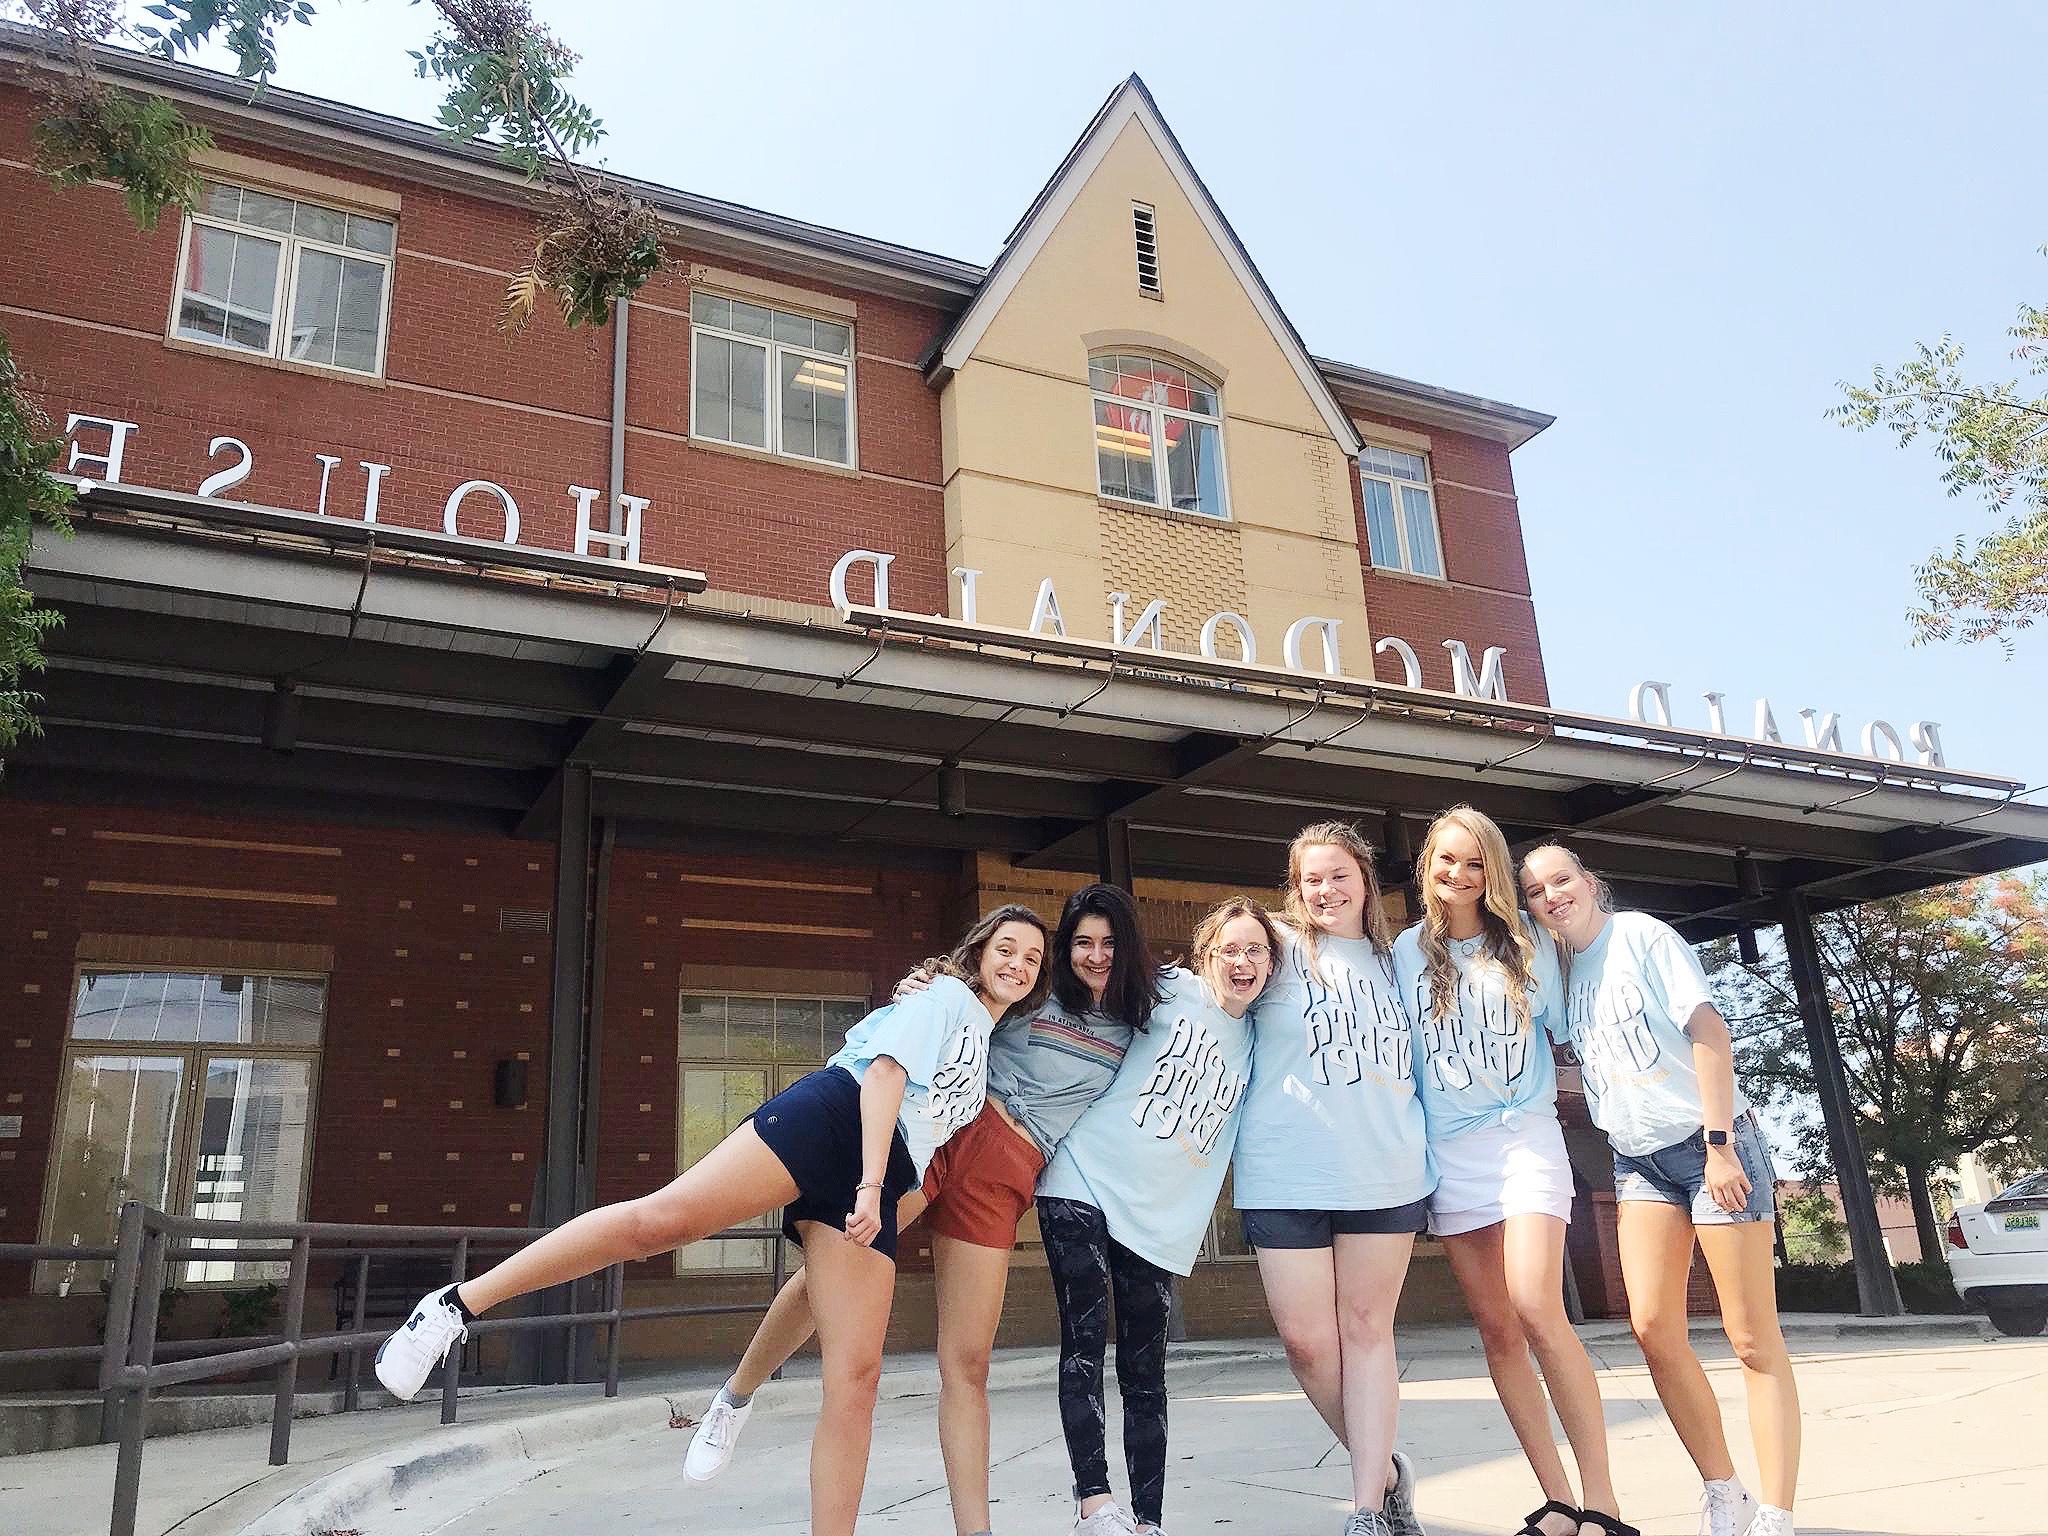 Members of Alpha Delta Pi pose for a photo outside of the Ronald McDonald House Charities.